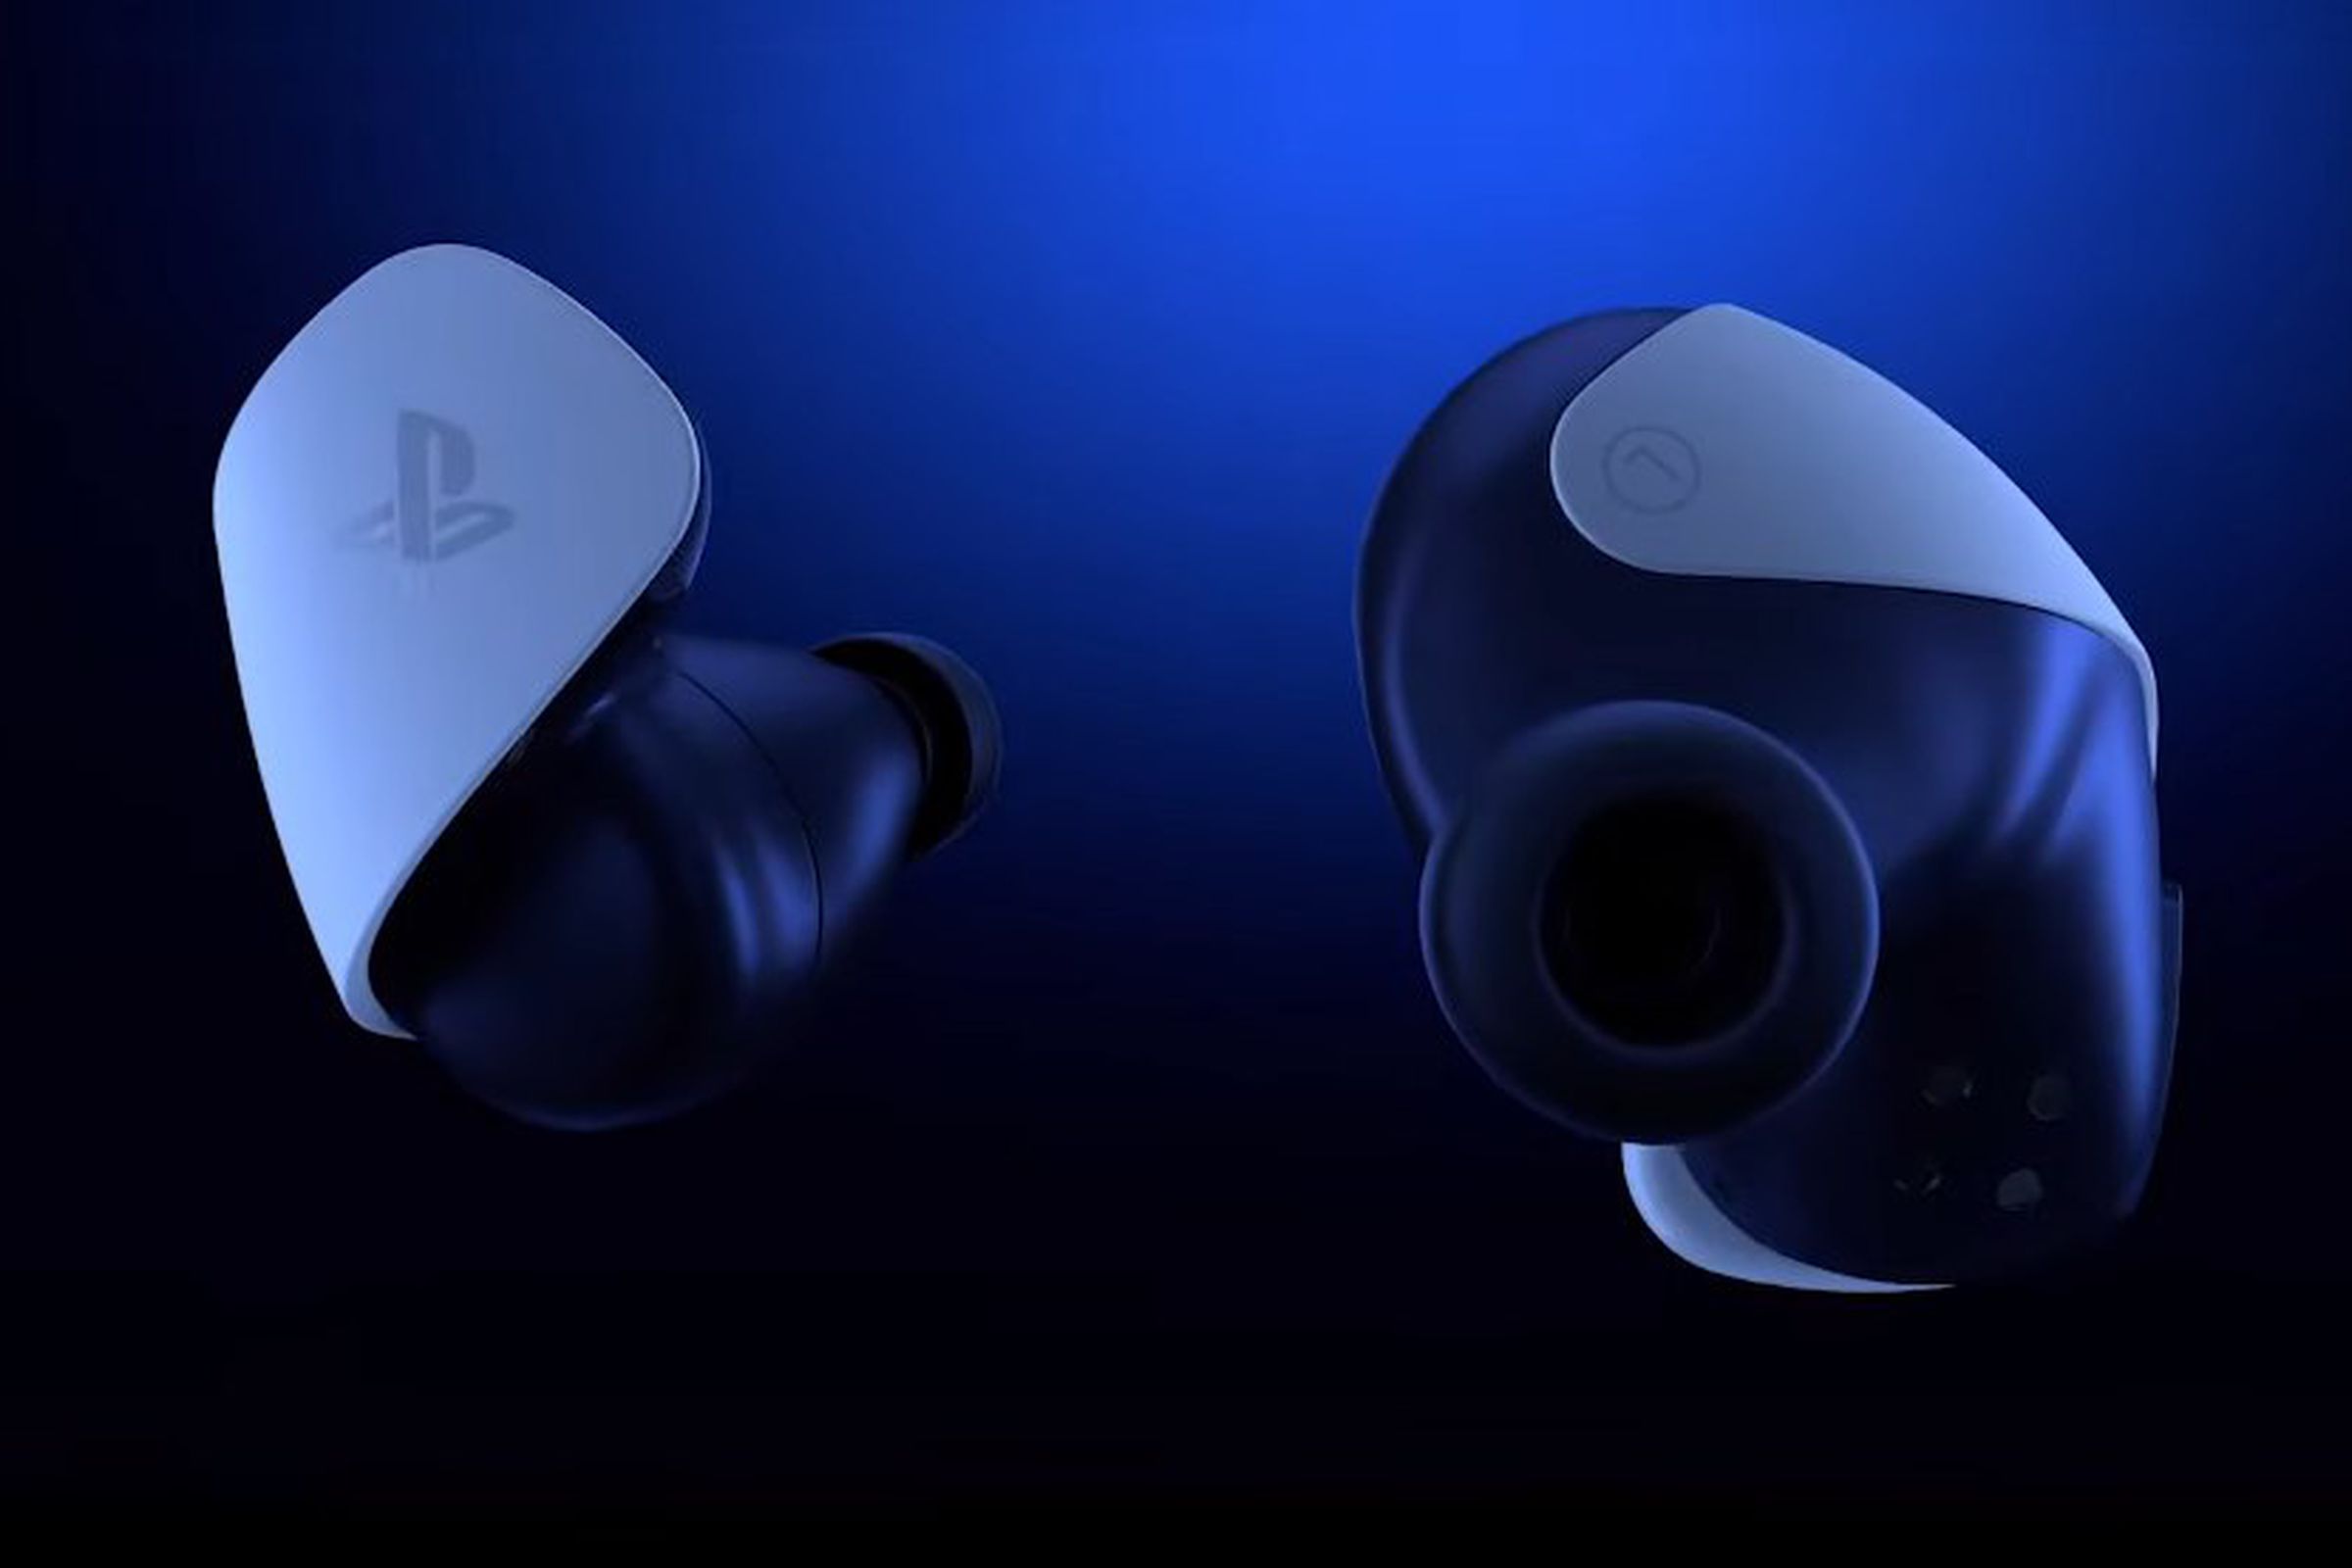 Pair of PlayStation earbuds shown floating freely